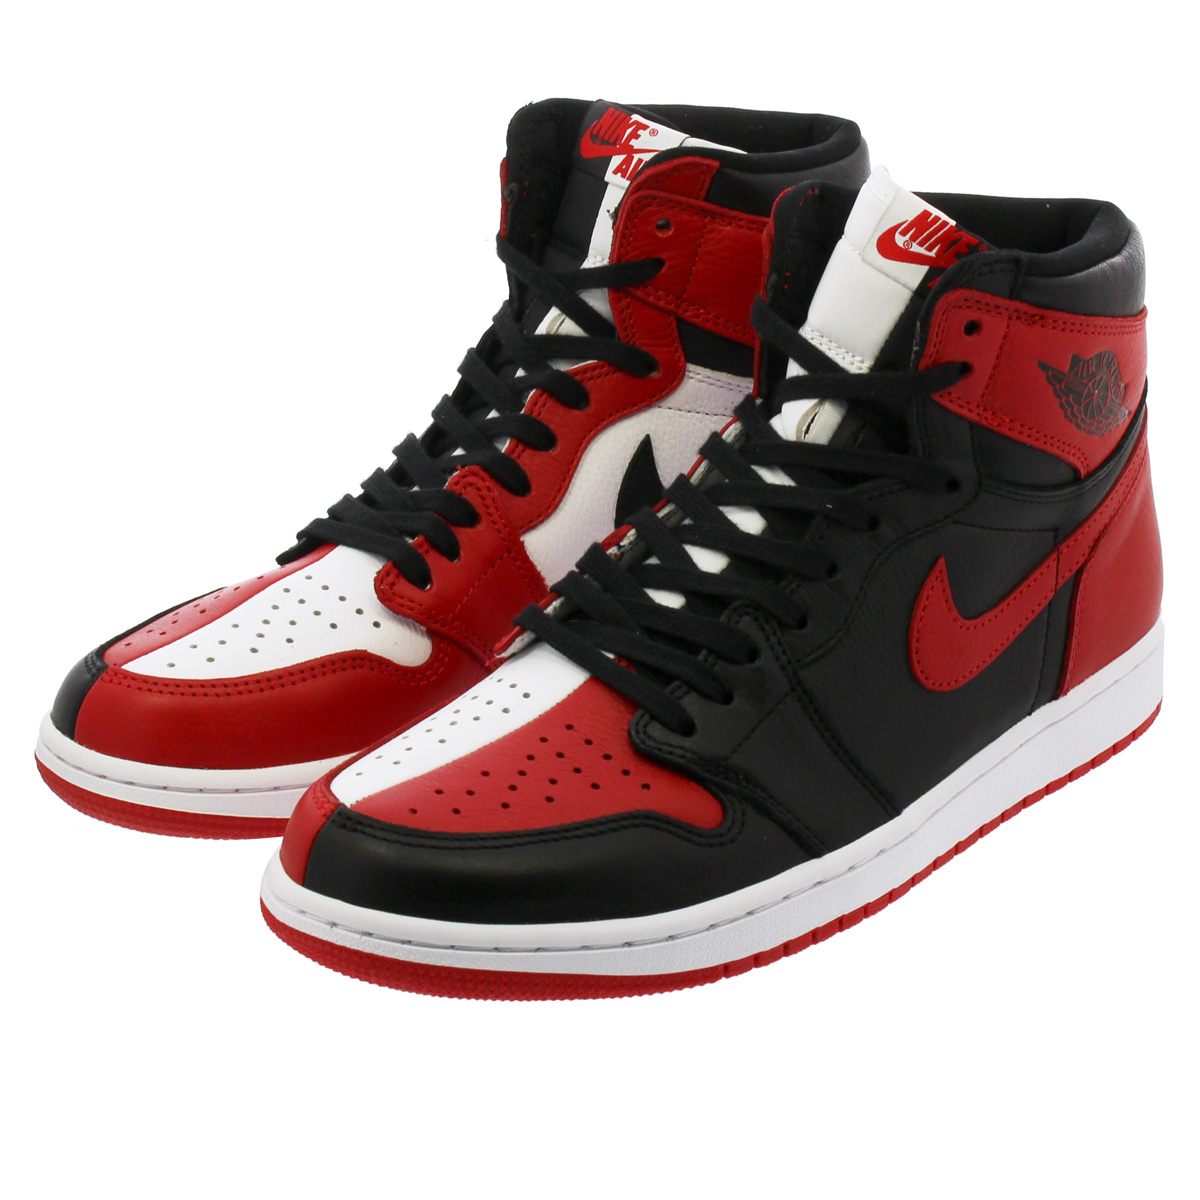 NIKE AIR JORDAN 1 RETRO HIGH OG 【HOMAGE TO HOME】【LIMITED 2300】【NUMBERED】  ナイキ エア ジョーダン 1 レトロ ハイ OG BLACK/WHITE/UNIVERSITY RED | SELECT SHOP LOWTEX